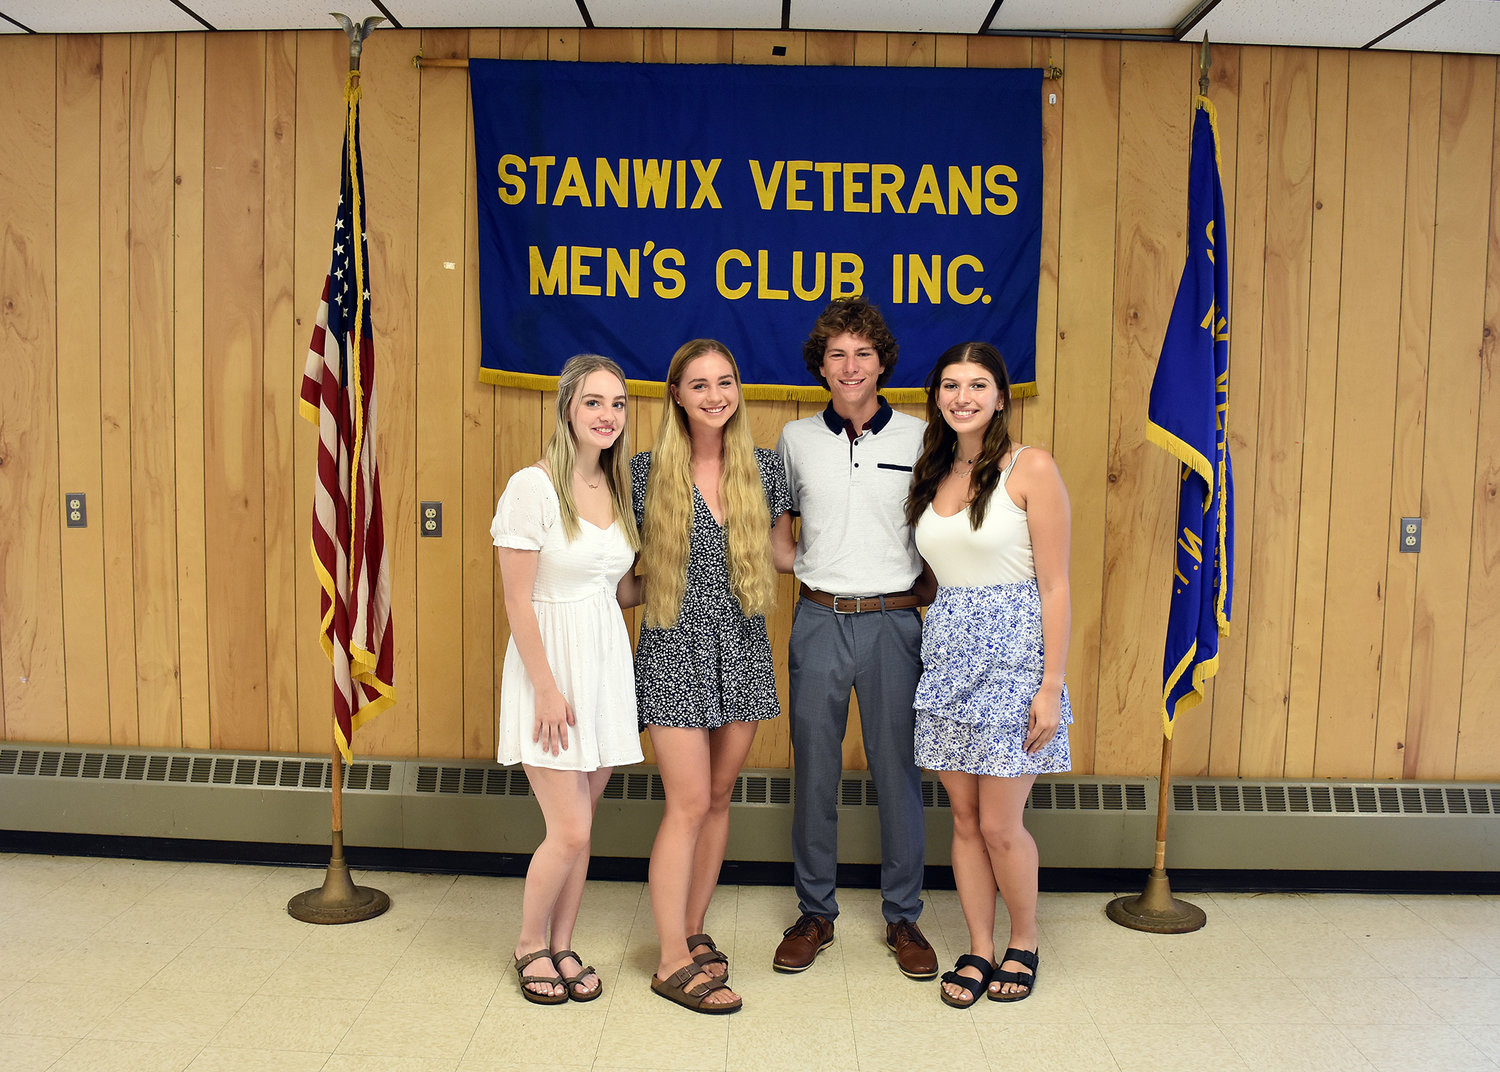 The Stanwix Veterans & Men’s Club, 6774 Lamphear Road, has announced the recipients of its 2022 scholarships. The club has awarded $3,000 to 11 students from sevent area high schools. The 2022 scholarships include four scholarship awards which were awarded to members’ children, while seven other scholarships were awarded to area students who were selected by the guidance departments of the various schools. Recipients of the $500 member scholarship awards are: Paige Pekarski, of Rome Free Academy; Alexandra Albrecht, of Westmoreland High School;  Carl Potter, of Oneida High School; and Madison Morawiec of Holland Patent.